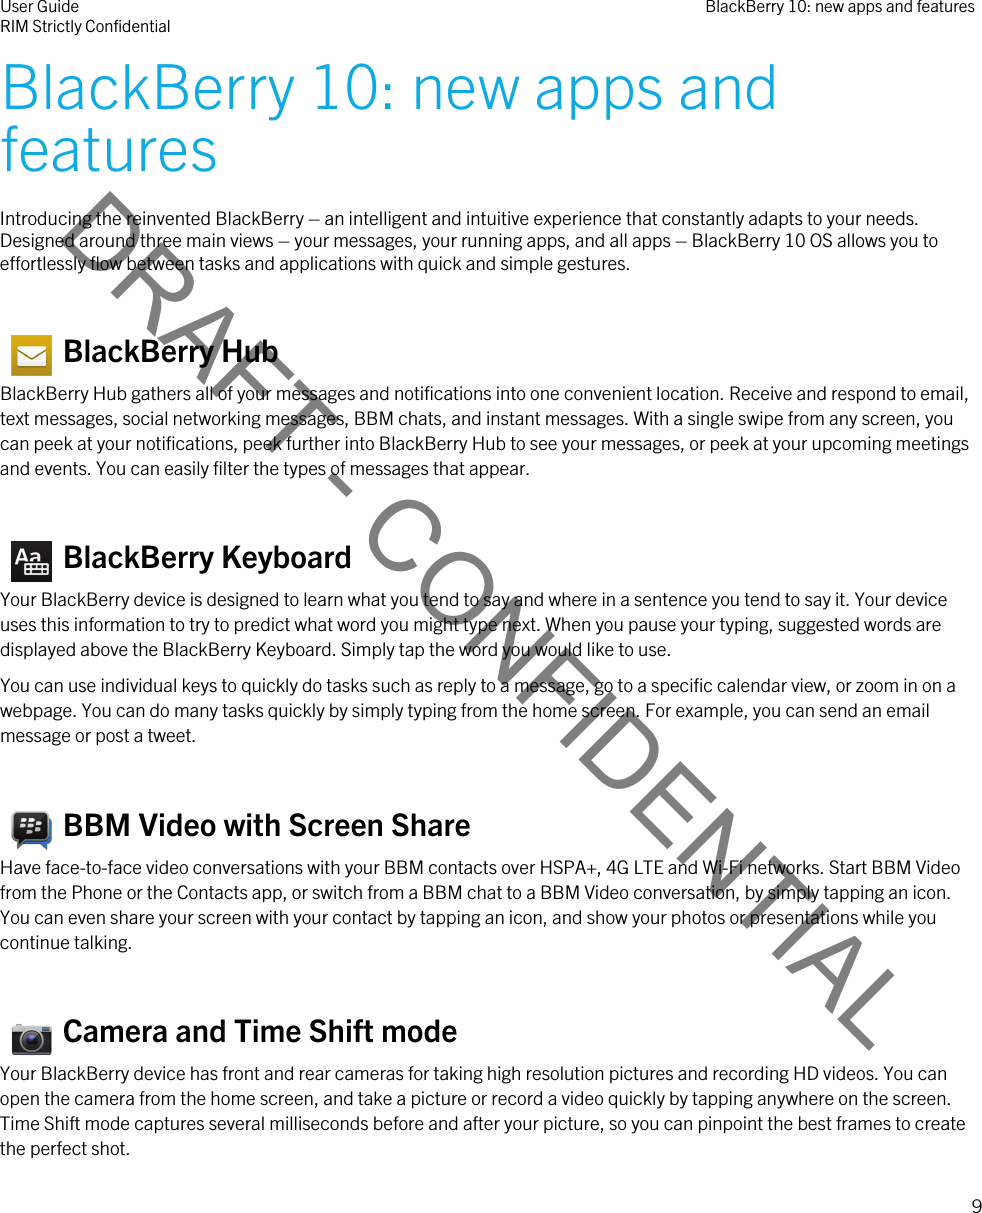 DRAFT - CONFIDENTIALBlackBerry 10: new apps and featuresIntroducing the reinvented BlackBerry – an intelligent and intuitive experience that constantly adapts to your needs. Designed around three main views – your messages, your running apps, and all apps – BlackBerry 10 OS allows you to effortlessly flow between tasks and applications with quick and simple gestures.   BlackBerry HubBlackBerry Hub gathers all of your messages and notifications into one convenient location. Receive and respond to email, text messages, social networking messages, BBM chats, and instant messages. With a single swipe from any screen, you can peek at your notifications, peek further into BlackBerry Hub to see your messages, or peek at your upcoming meetings and events. You can easily filter the types of messages that appear.   BlackBerry KeyboardYour BlackBerry device is designed to learn what you tend to say and where in a sentence you tend to say it. Your device uses this information to try to predict what word you might type next. When you pause your typing, suggested words are displayed above the BlackBerry Keyboard. Simply tap the word you would like to use.You can use individual keys to quickly do tasks such as reply to a message, go to a specific calendar view, or zoom in on a webpage. You can do many tasks quickly by simply typing from the home screen. For example, you can send an email message or post a tweet.   BBM Video with Screen ShareHave face-to-face video conversations with your BBM contacts over HSPA+, 4G LTE and Wi-Fi networks. Start BBM Video from the Phone or the Contacts app, or switch from a BBM chat to a BBM Video conversation, by simply tapping an icon. You can even share your screen with your contact by tapping an icon, and show your photos or presentations while you continue talking.   Camera and Time Shift modeYour BlackBerry device has front and rear cameras for taking high resolution pictures and recording HD videos. You can open the camera from the home screen, and take a picture or record a video quickly by tapping anywhere on the screen. Time Shift mode captures several milliseconds before and after your picture, so you can pinpoint the best frames to create the perfect shot.User GuideRIM Strictly Confidential BlackBerry 10: new apps and features9 